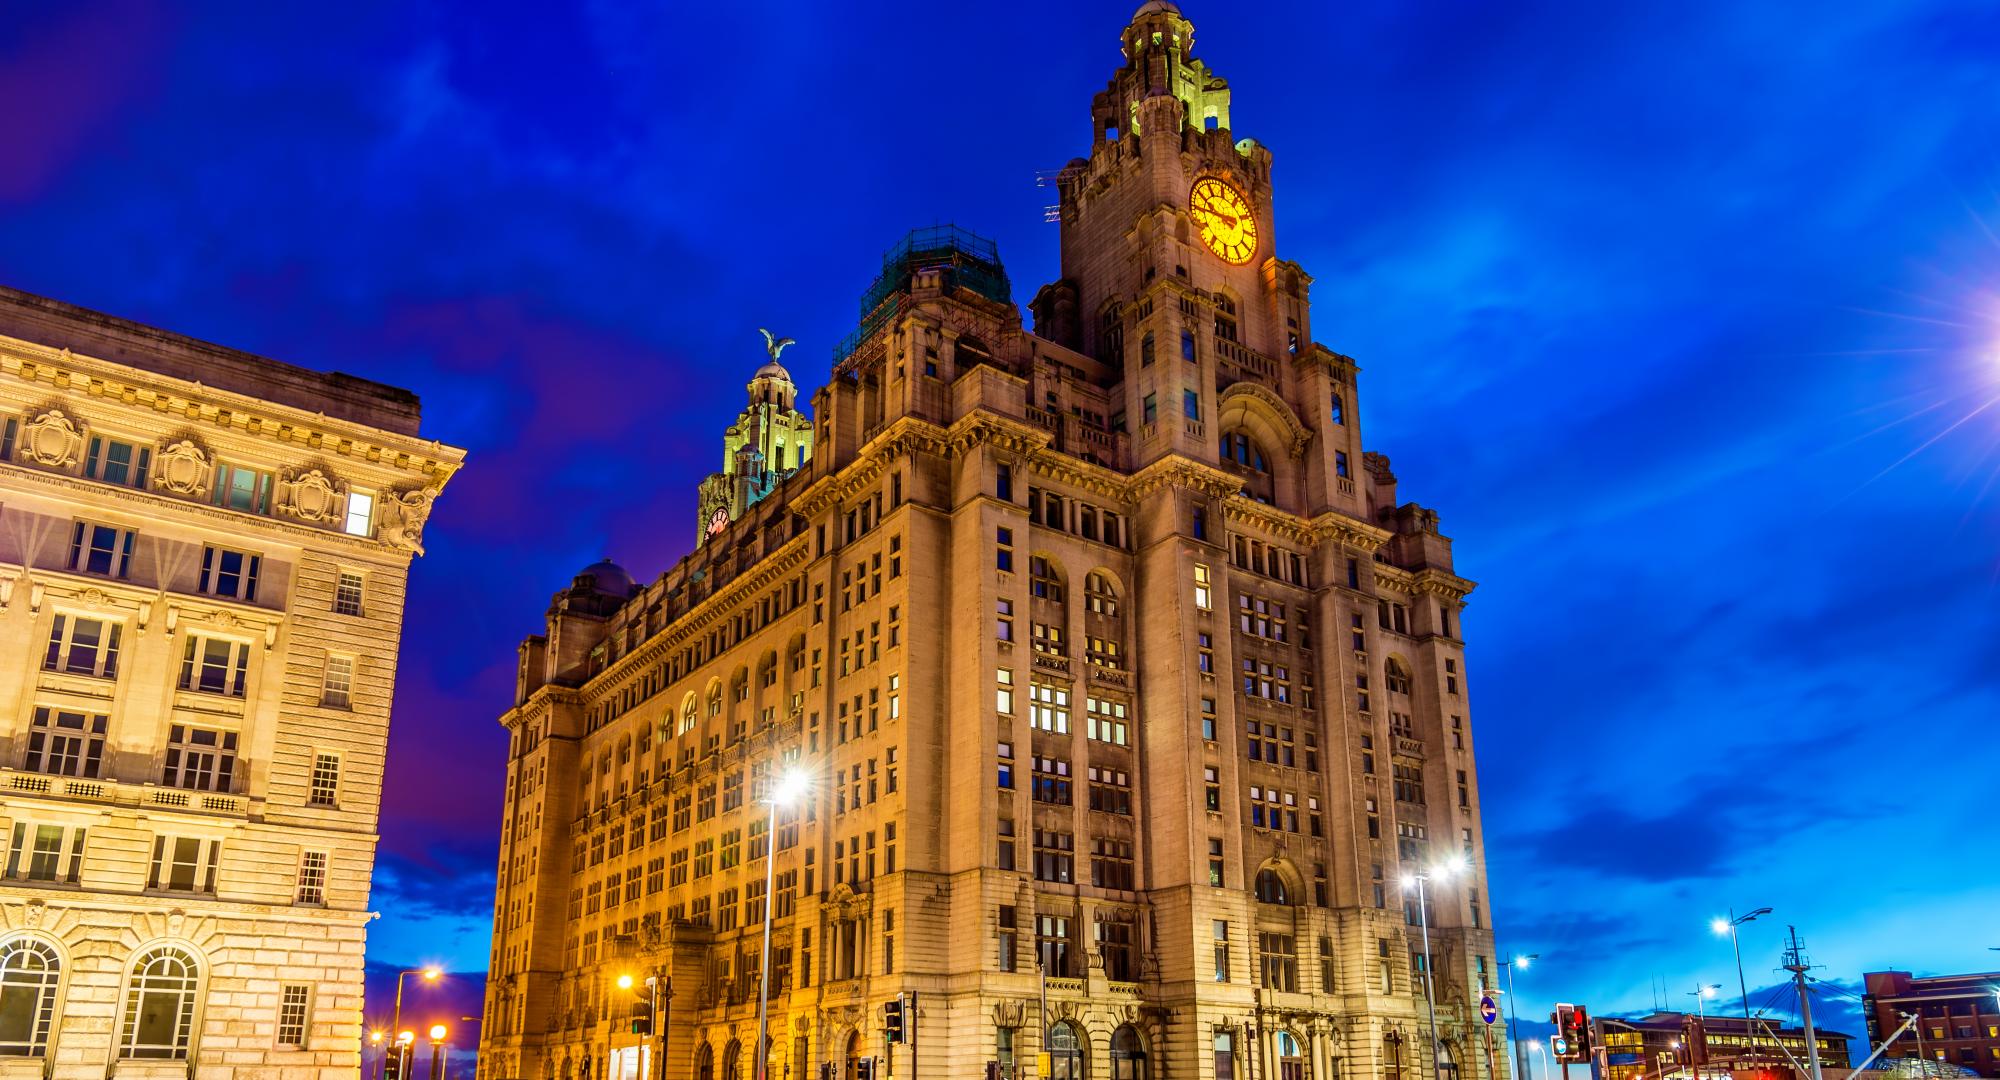 Royal Liver Building in Liverpool in the evening